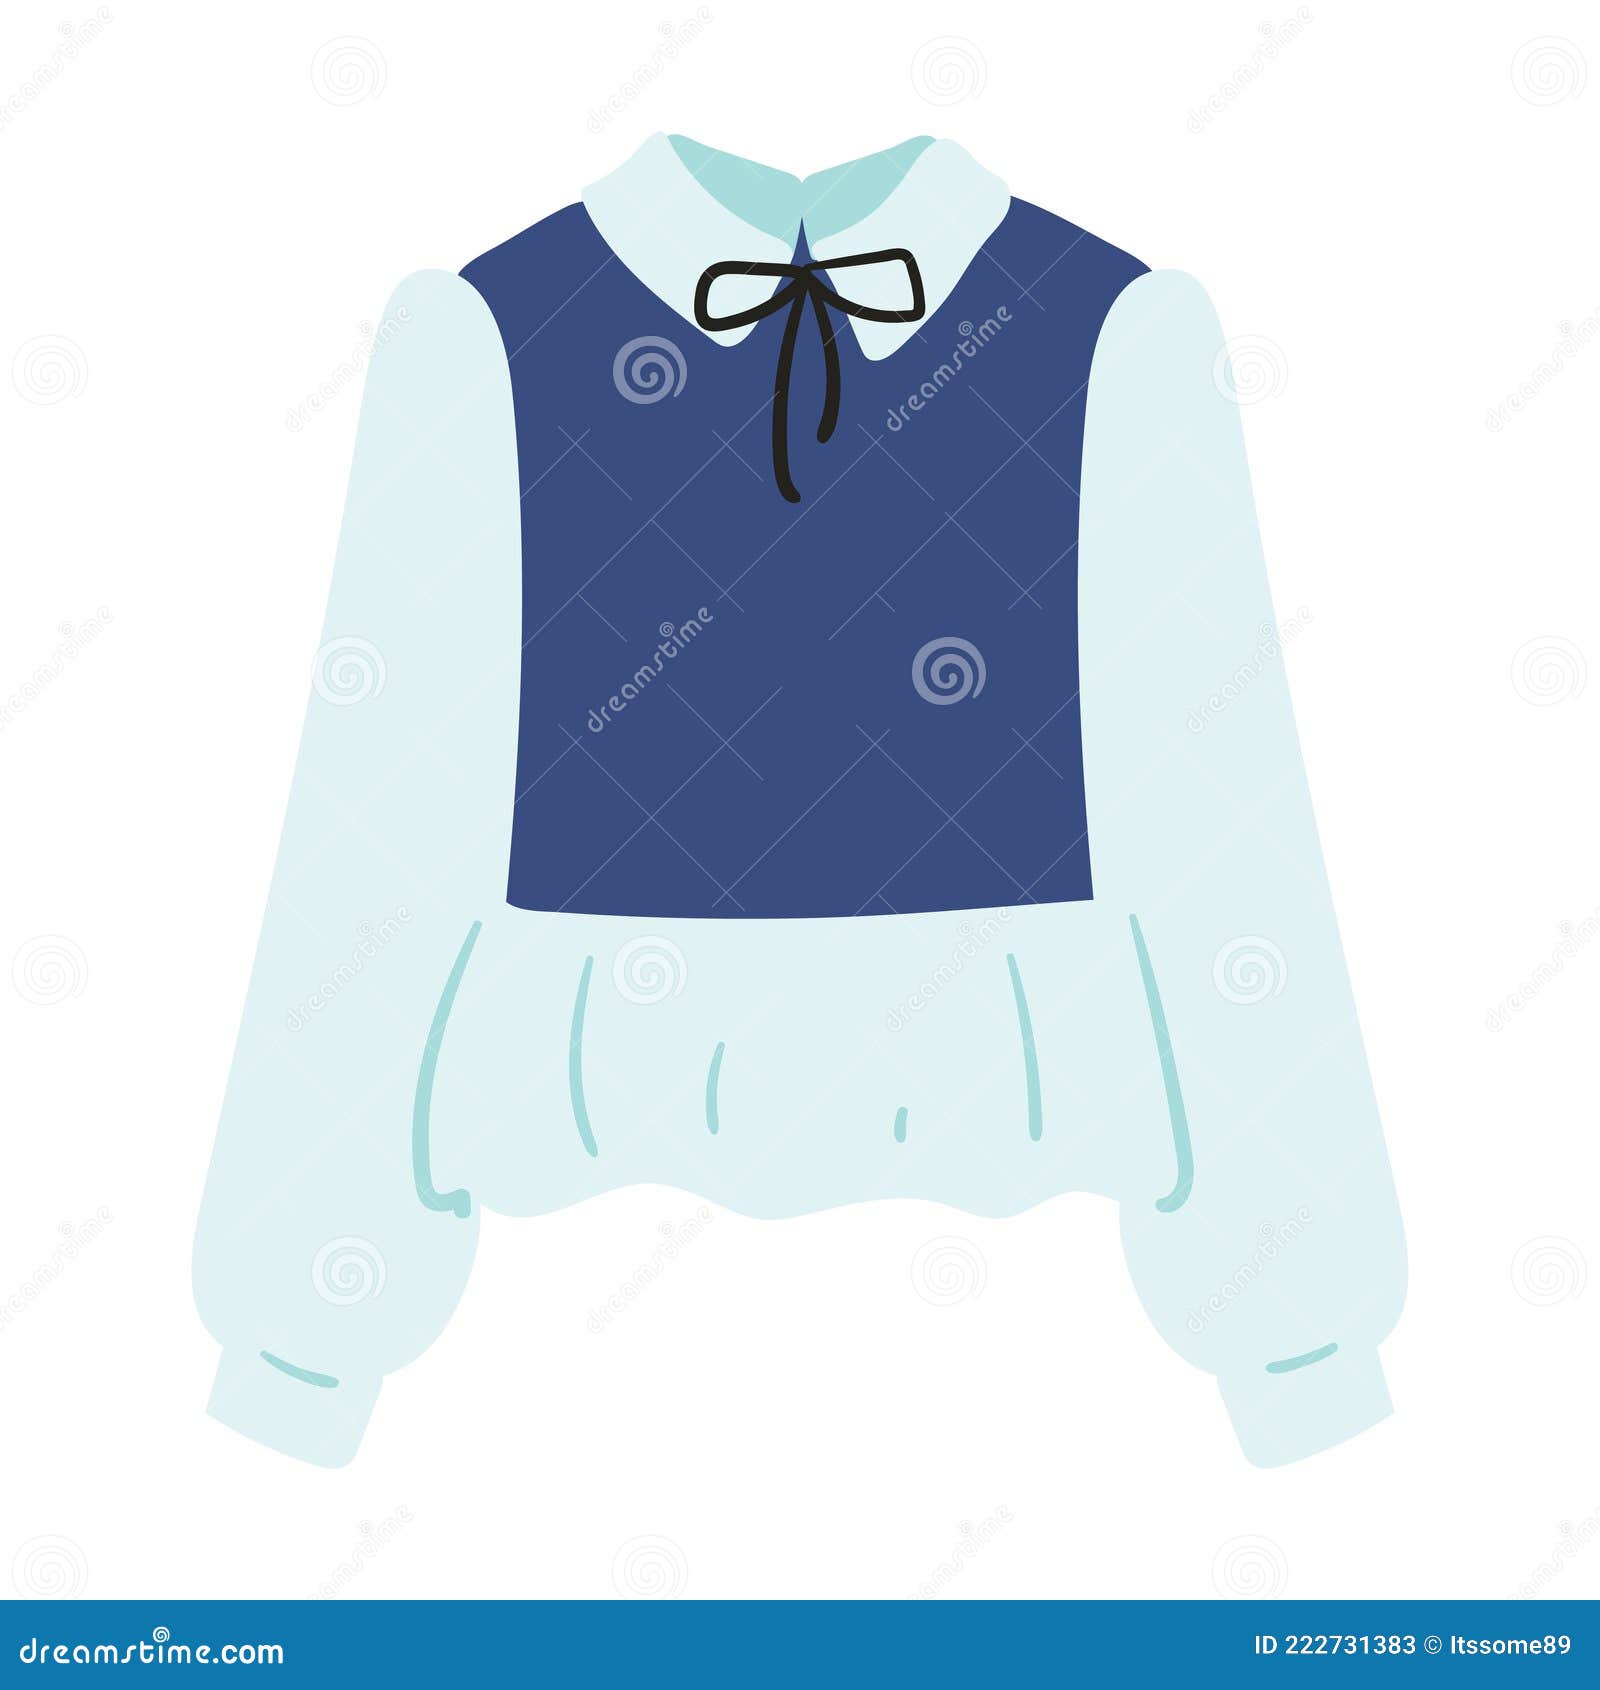 Cute Cartoon of Blue Blouse for Woman Stock Vector - Illustration of ...